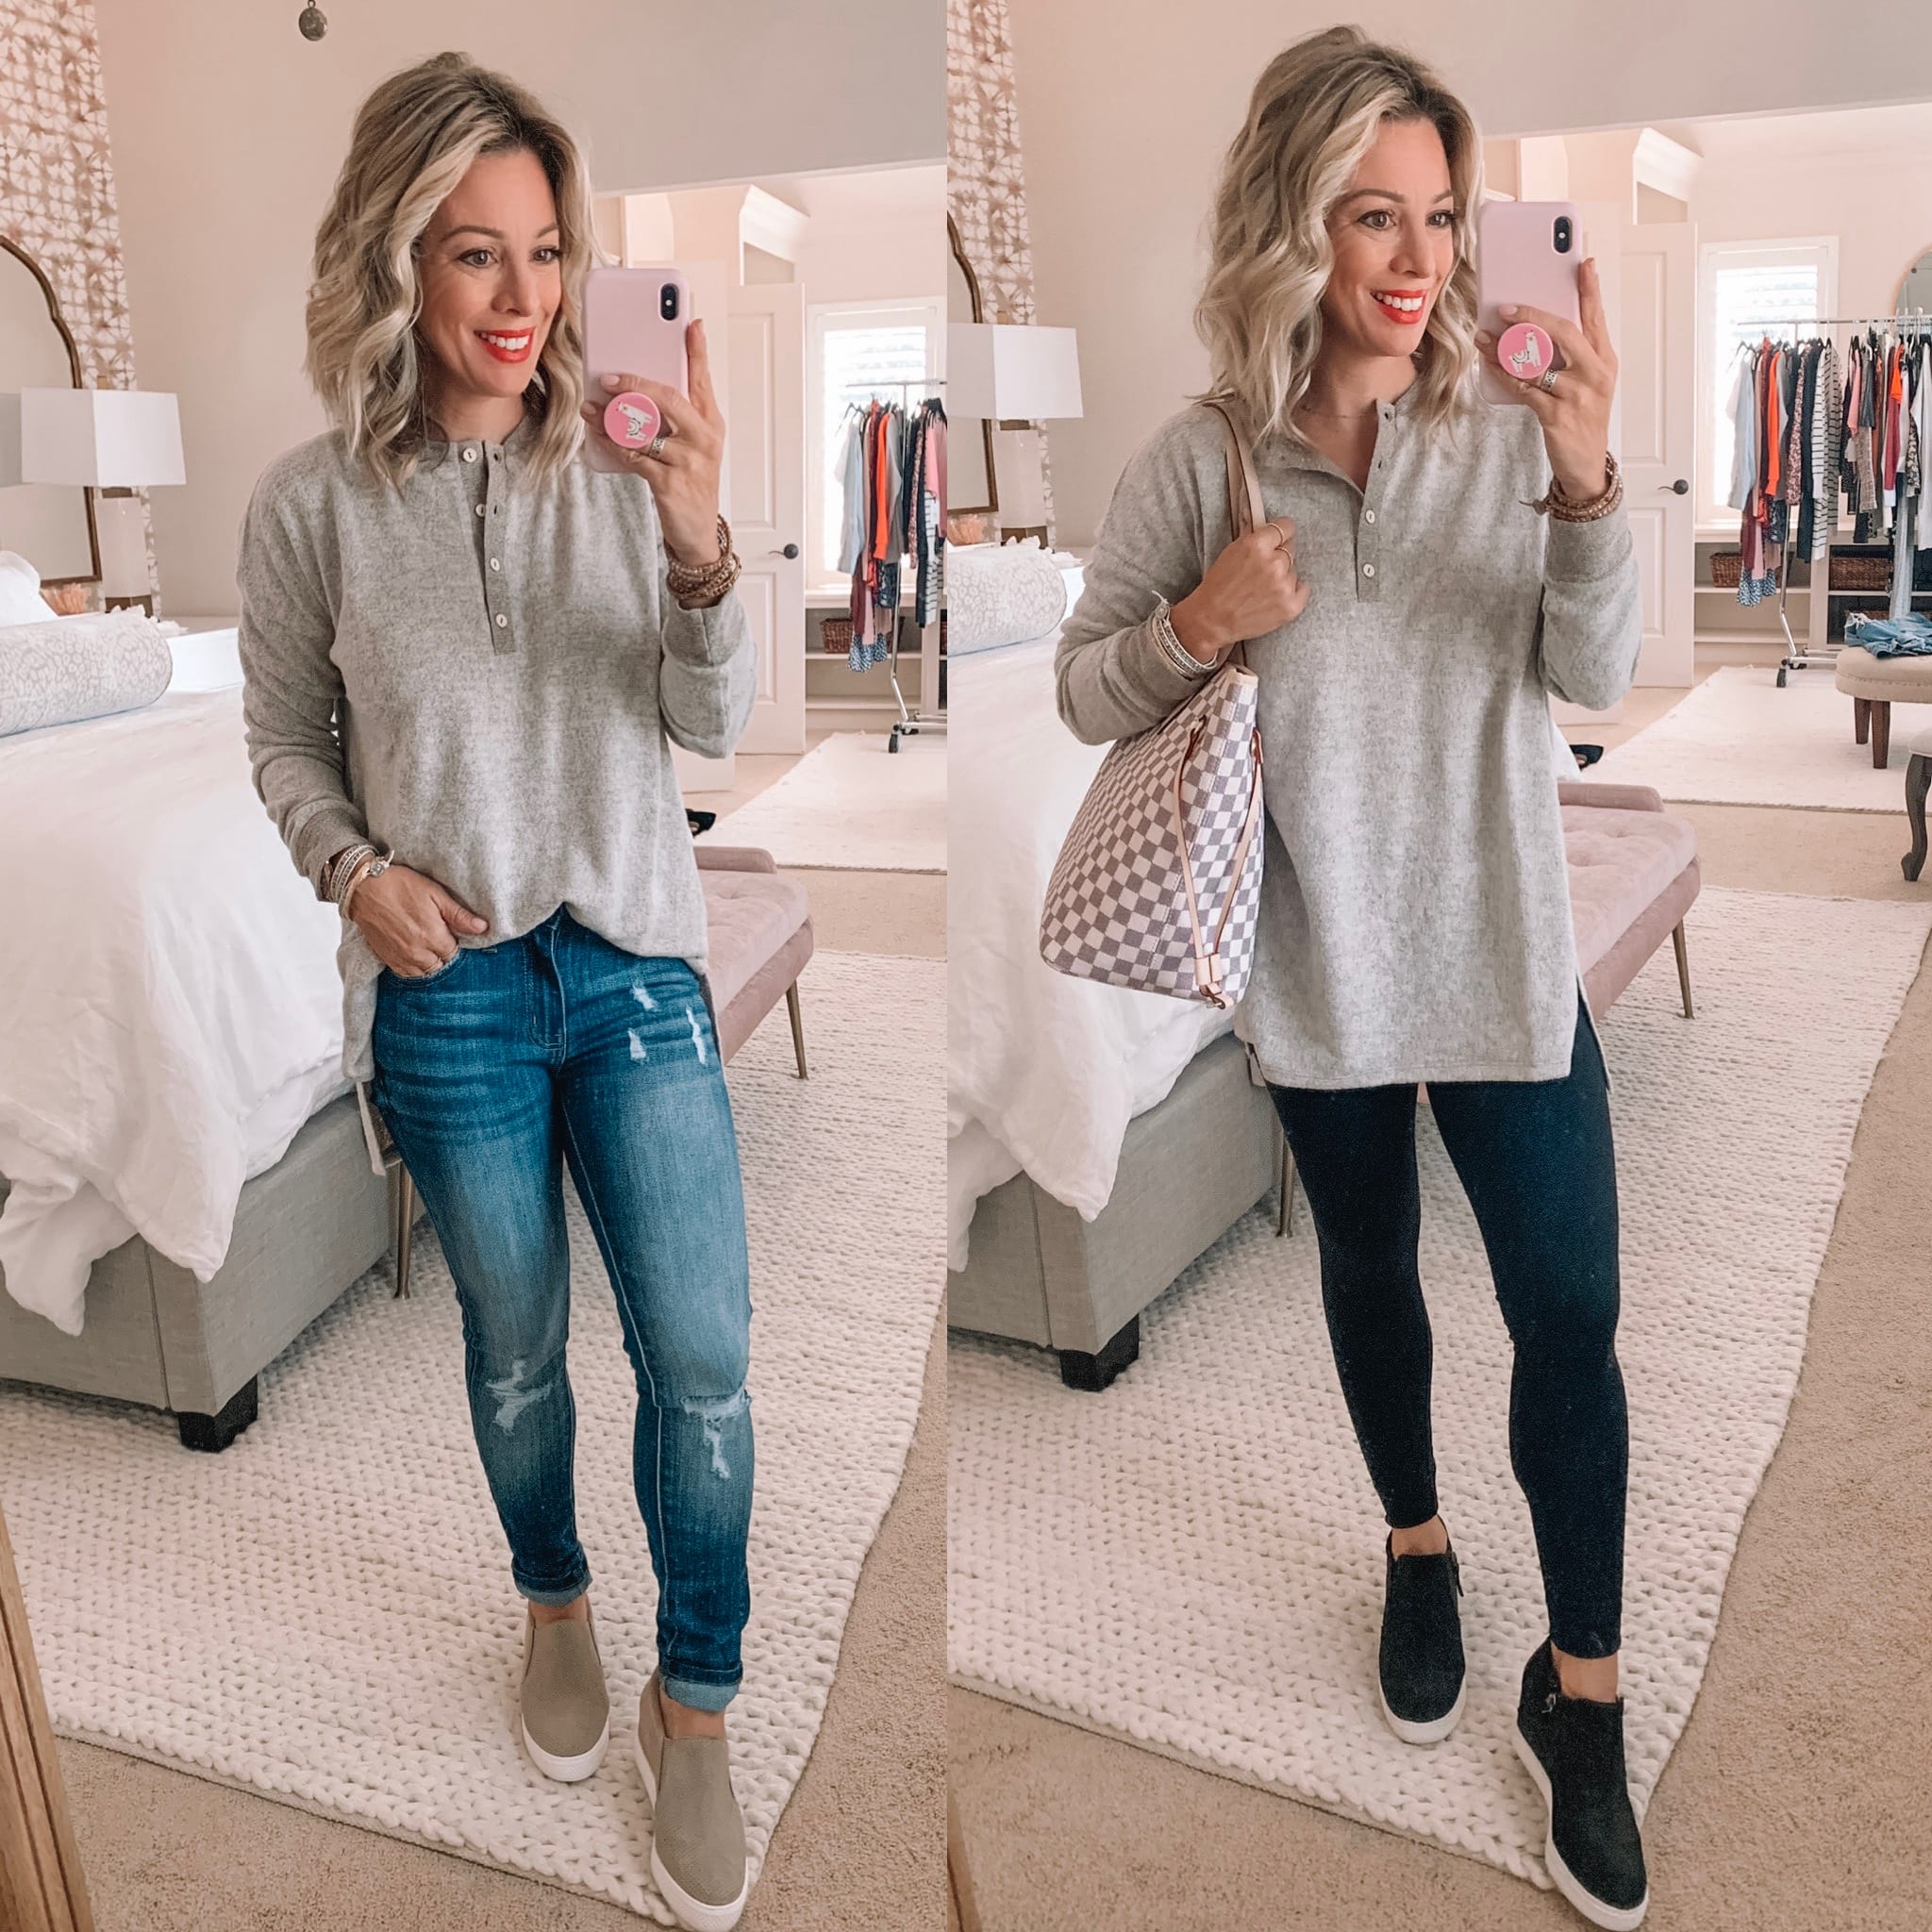 Dressing Room & Labor Day Sales - Honey We're Home